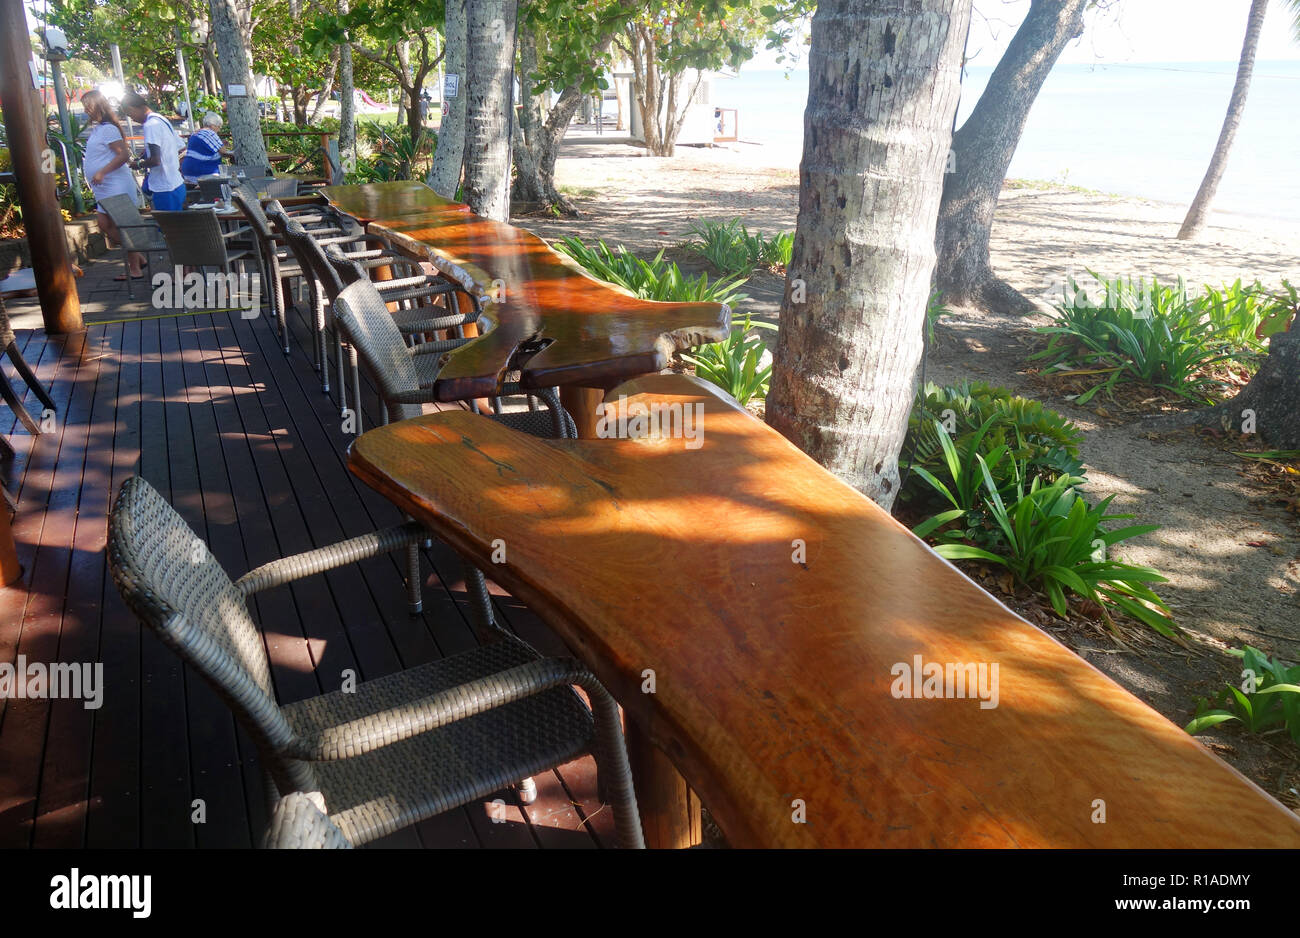 Cafe with timber table bar overlooking the beach, Holloways Beach, Cairns, Queensland, Australia. No PR or MR Stock Photo